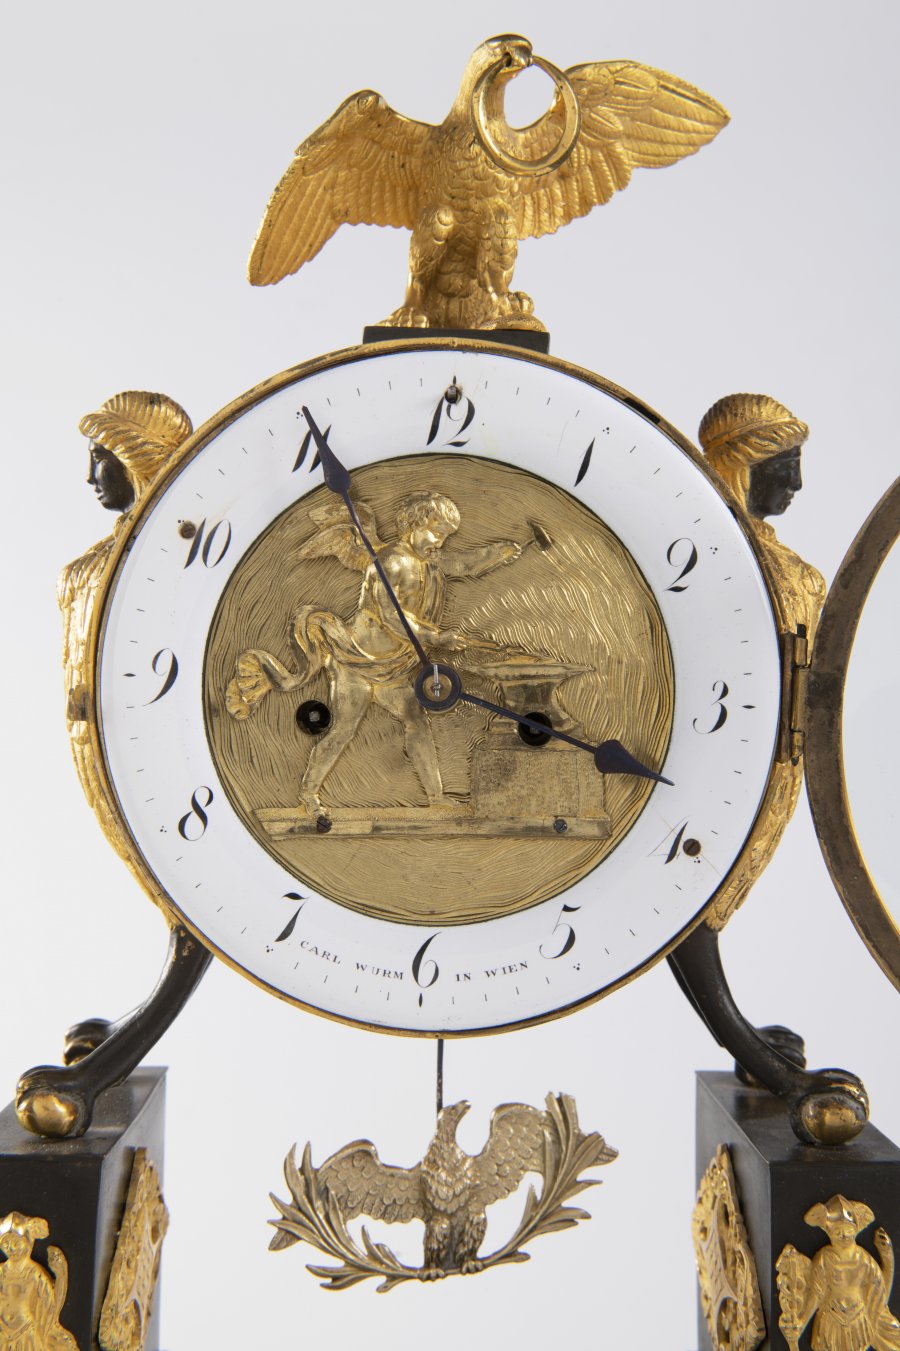 EMPIRE STYLE TABLE CLOCK